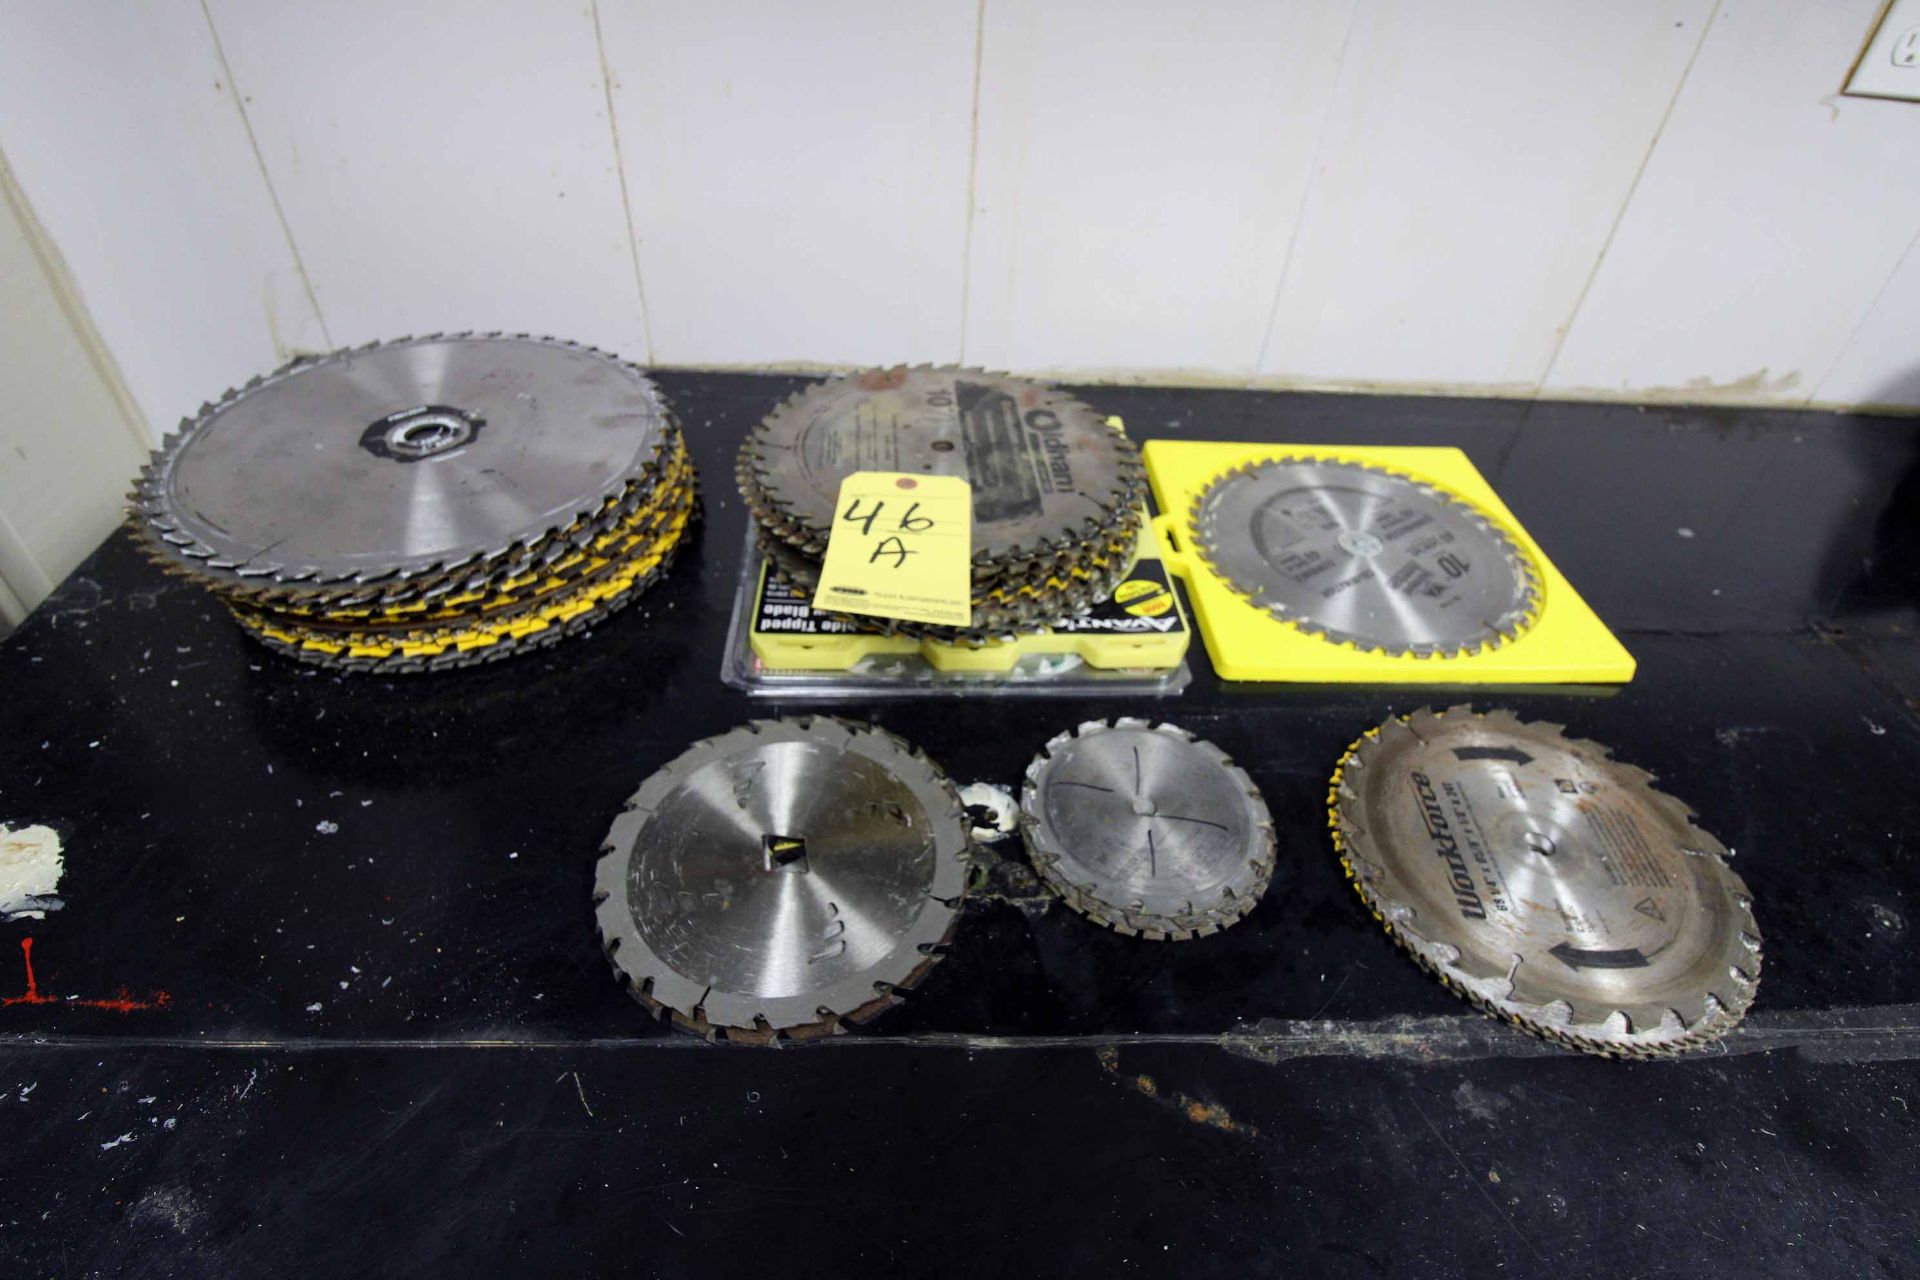 LOT OF SAW BLADES: 12", 10", 8", 6" (Located at: Offshore Clamps & Protectors, 435 Spring Hill